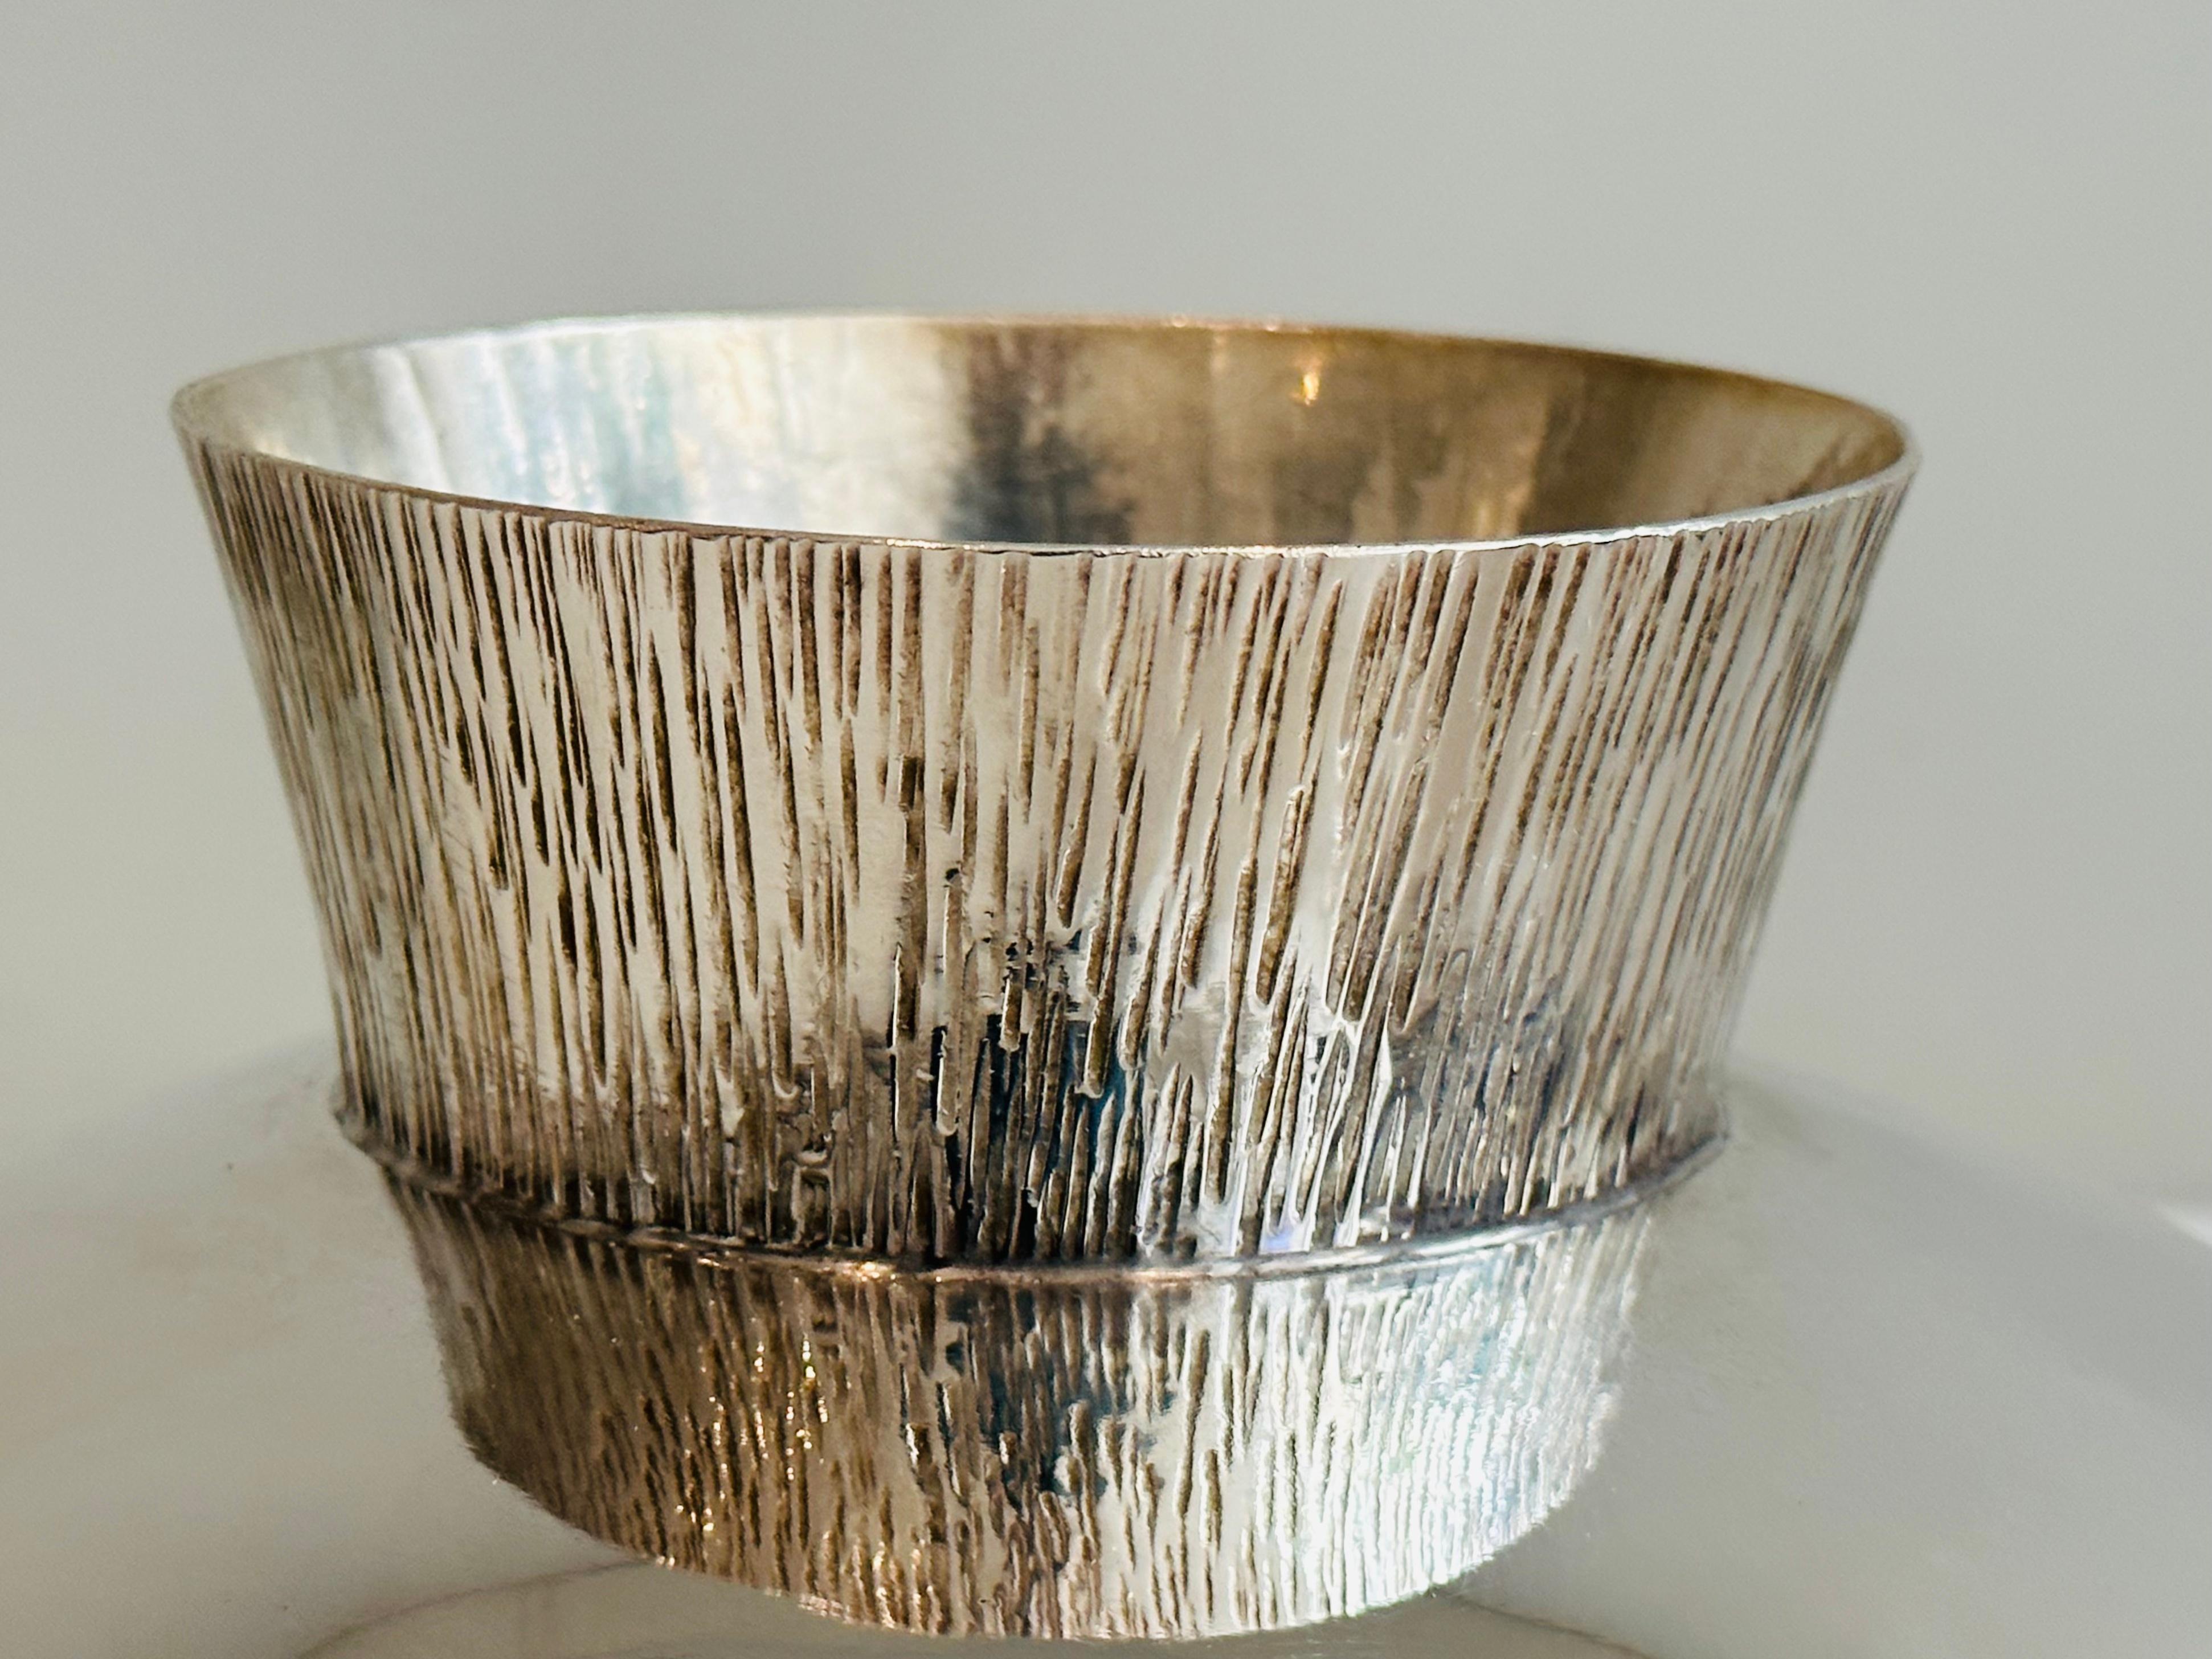 1980s English Silver Plated Decorative Hand-Hammered Serving or Display Bowl 13